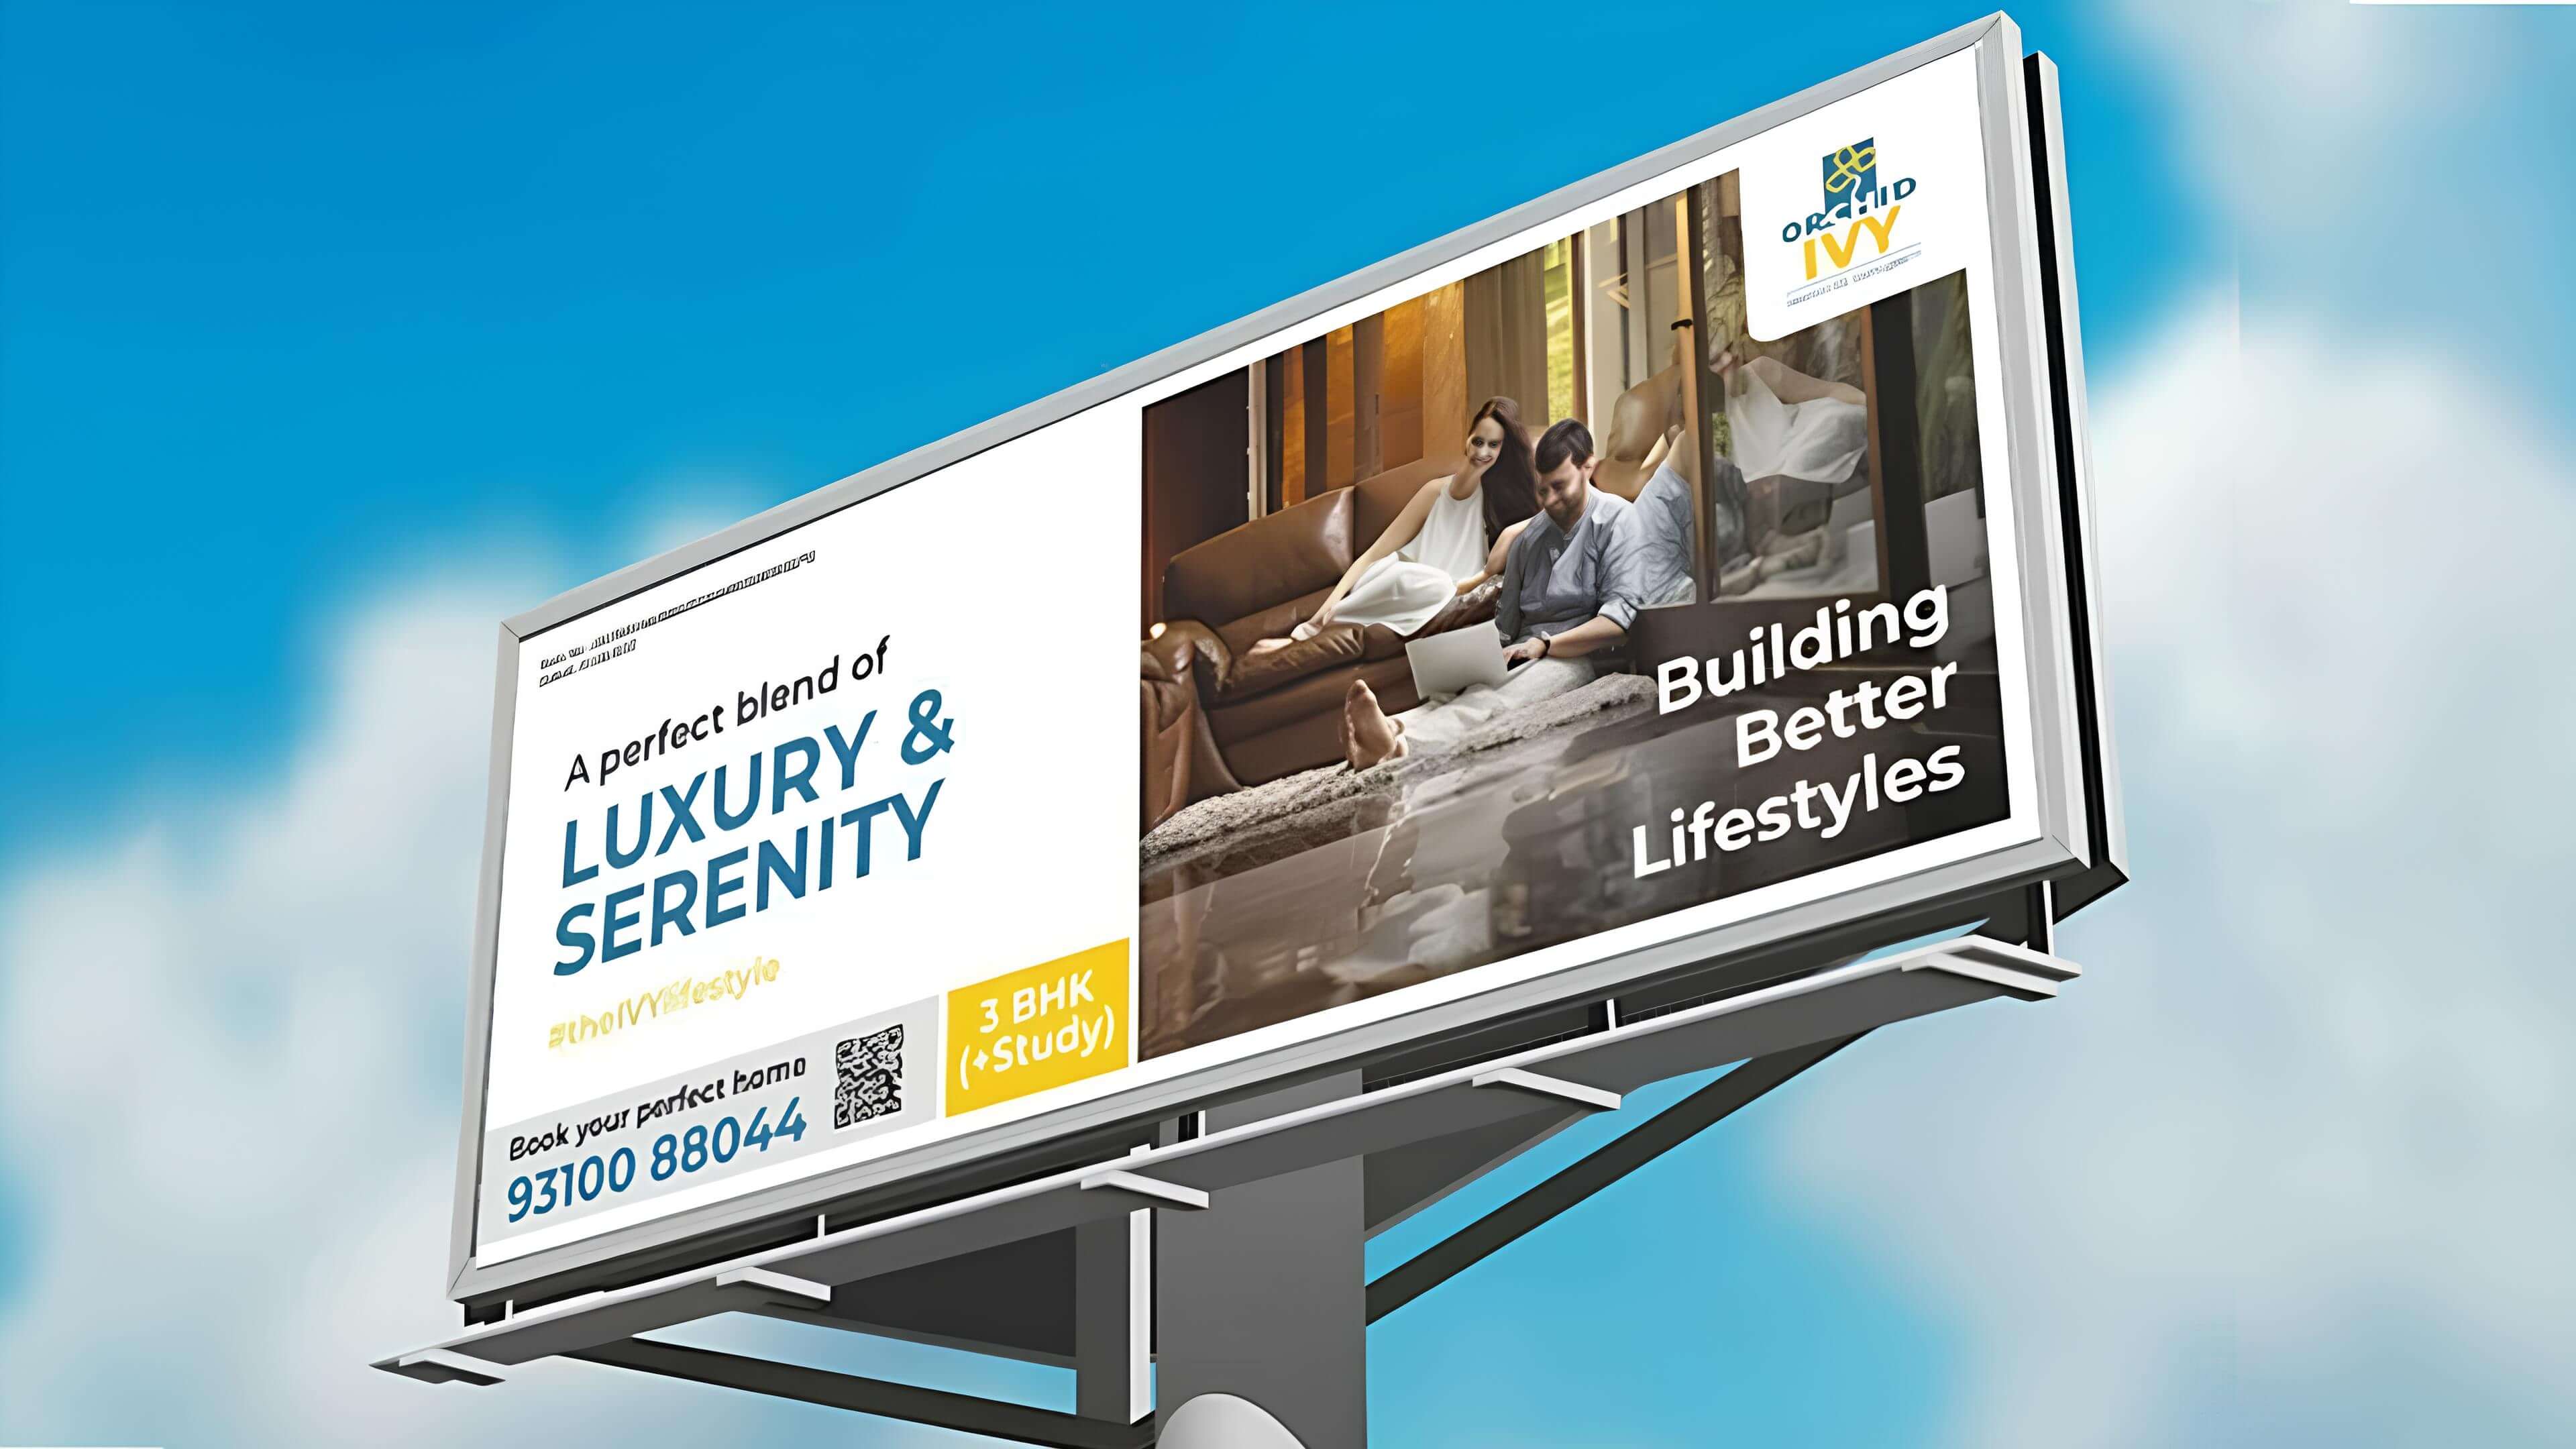 A billboard showing an ad for a luxury apartment buiding.